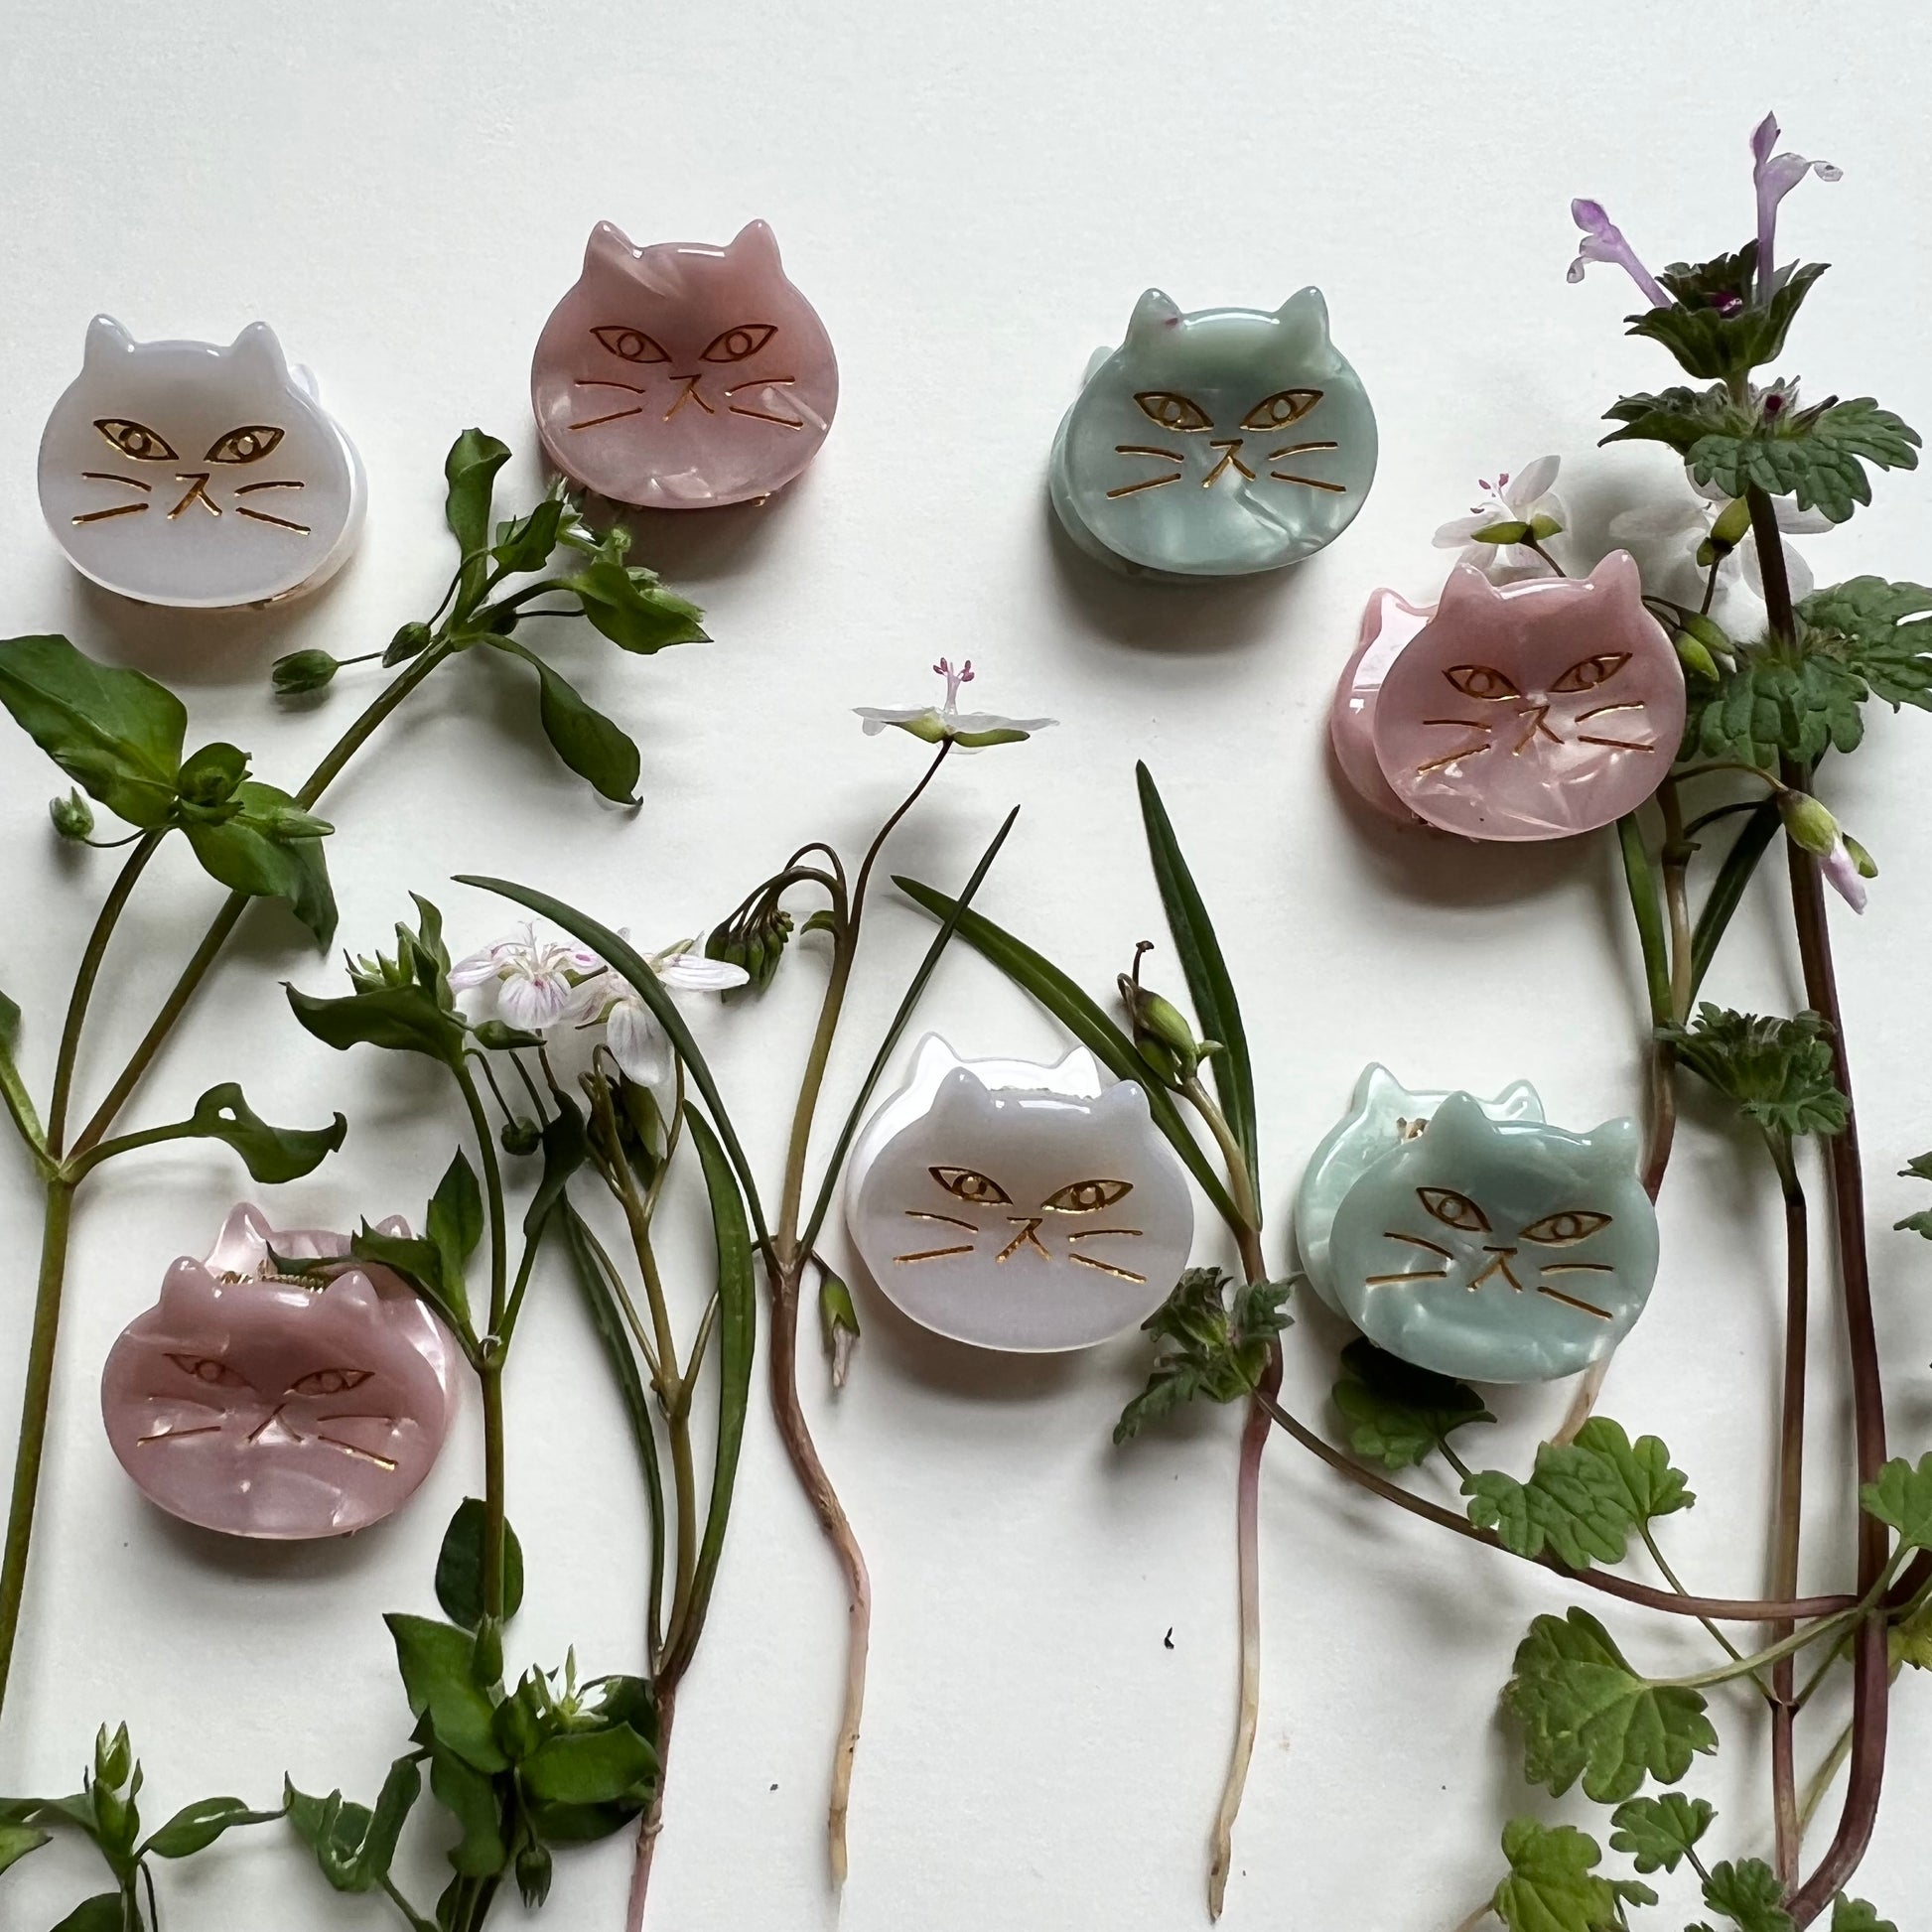 3 colors of cat face hair clips arranged on a white background with greenery and flowers.